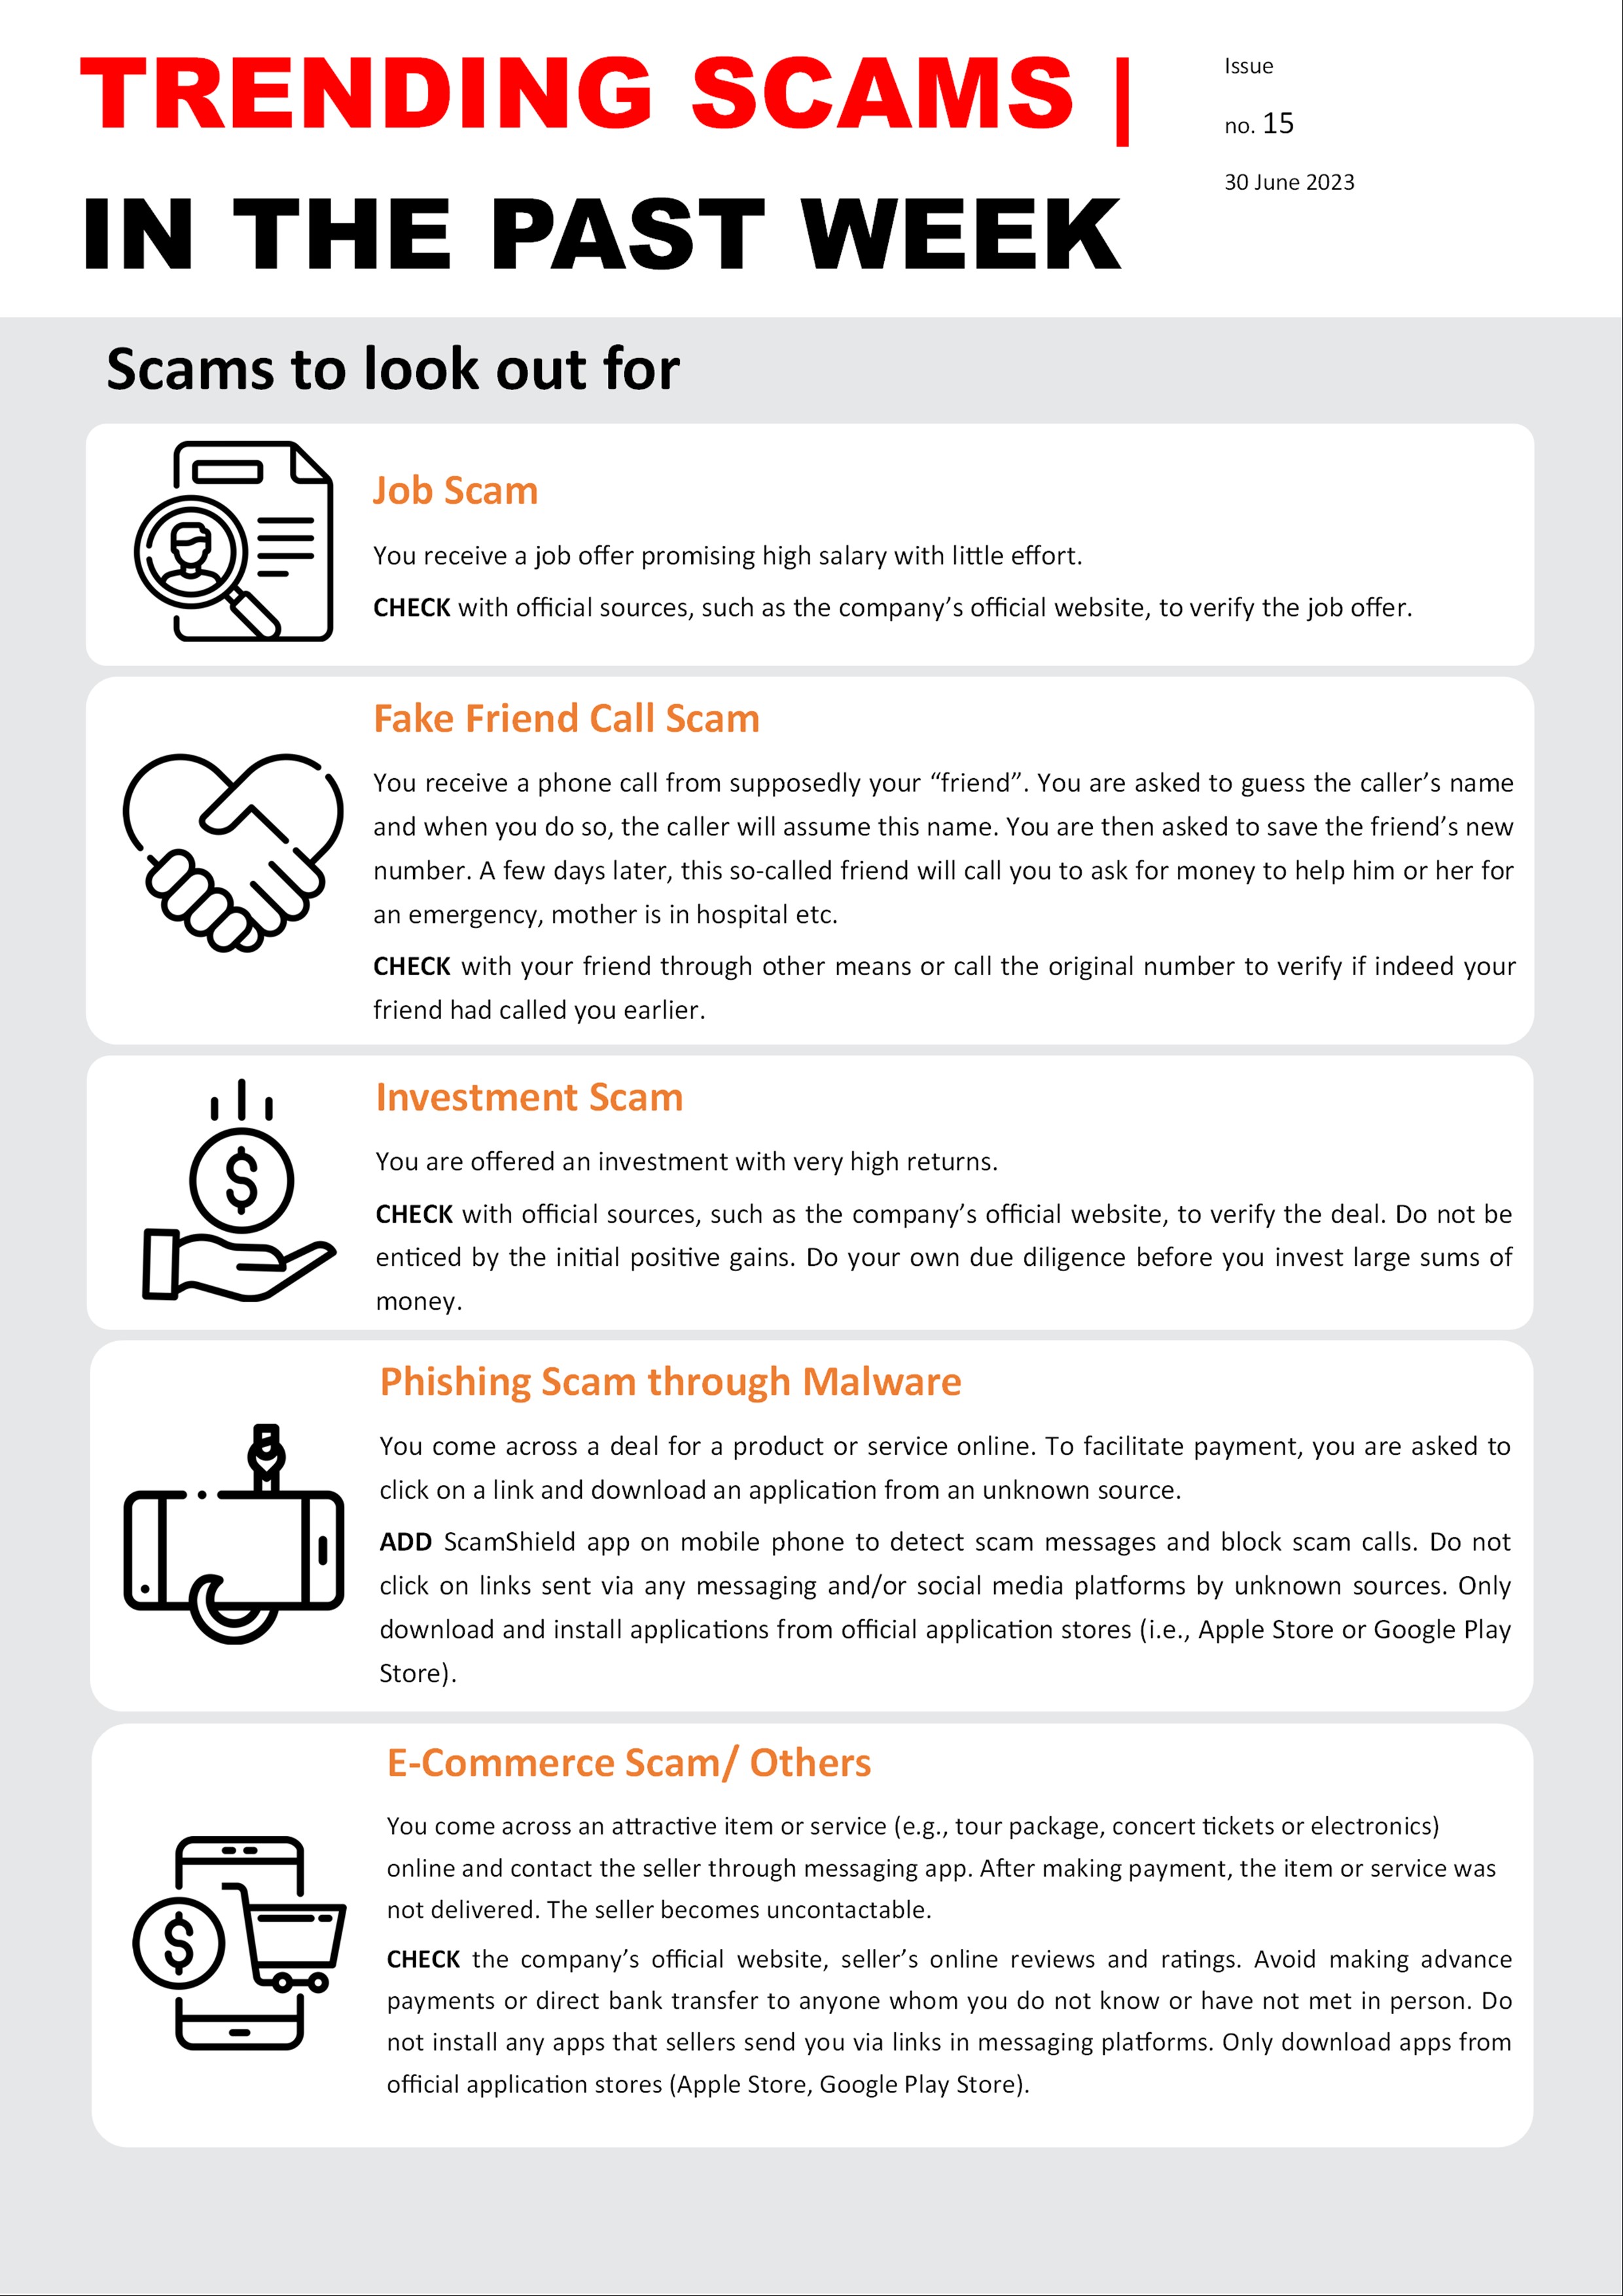 Weekly Bulletin Issue 15 - Scams to look out for